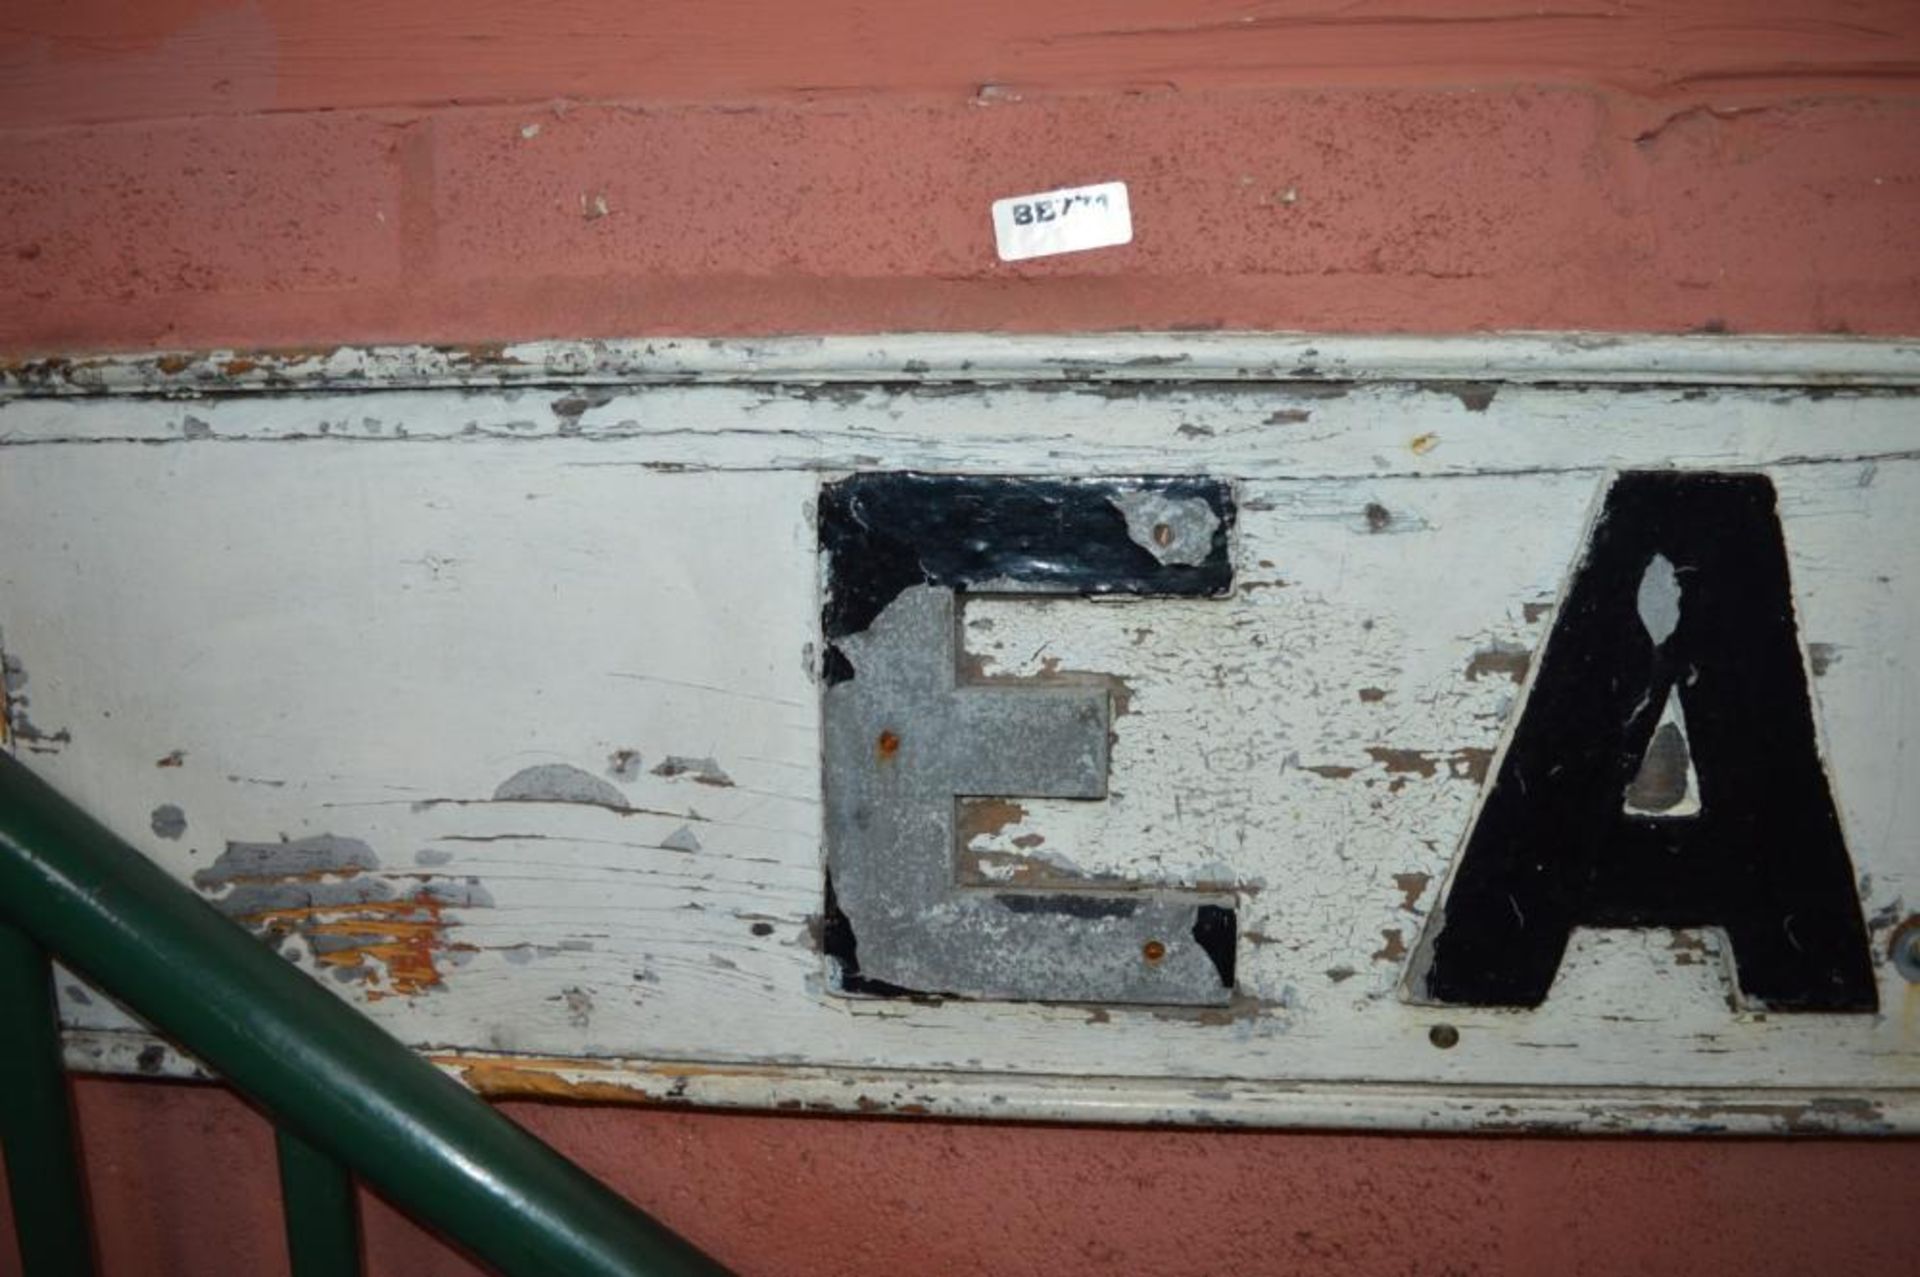 1 x East Junction Vintage Railway Signage - Wooden Back With Metal Lettering Finished in Black and W - Image 4 of 8